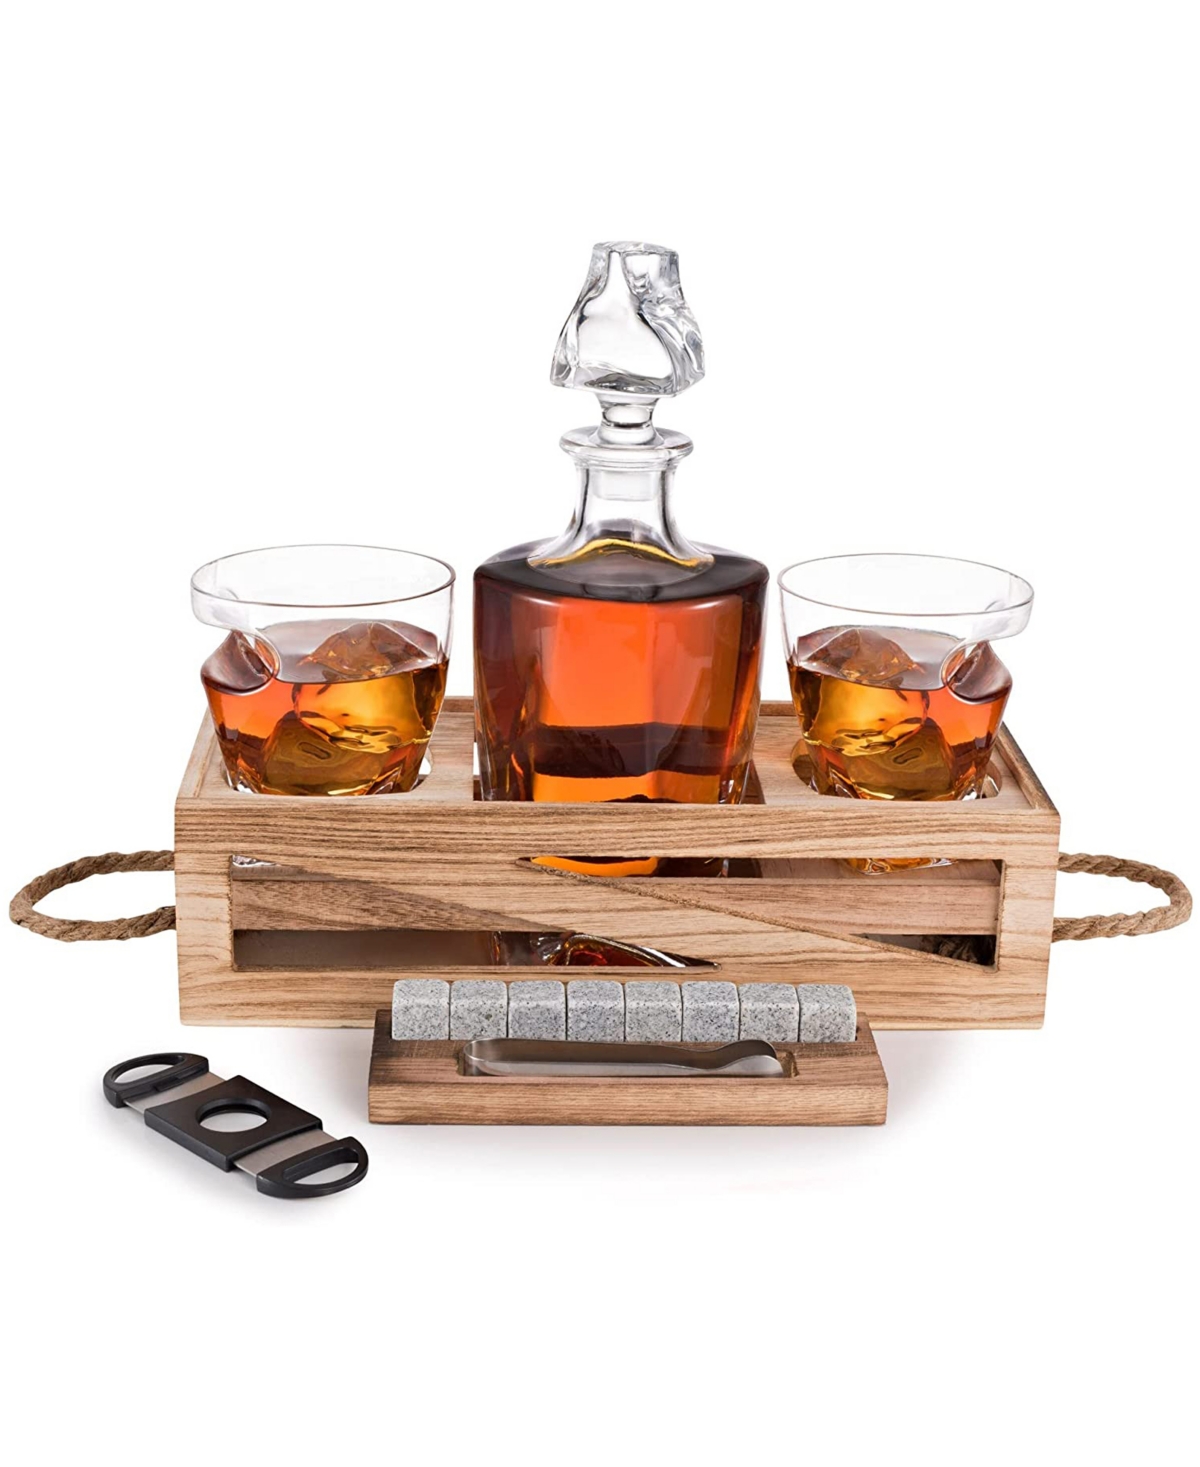 Bezrat Whiskey Decanter And Cigar Glass Gift Set, 14 Piece In Clear